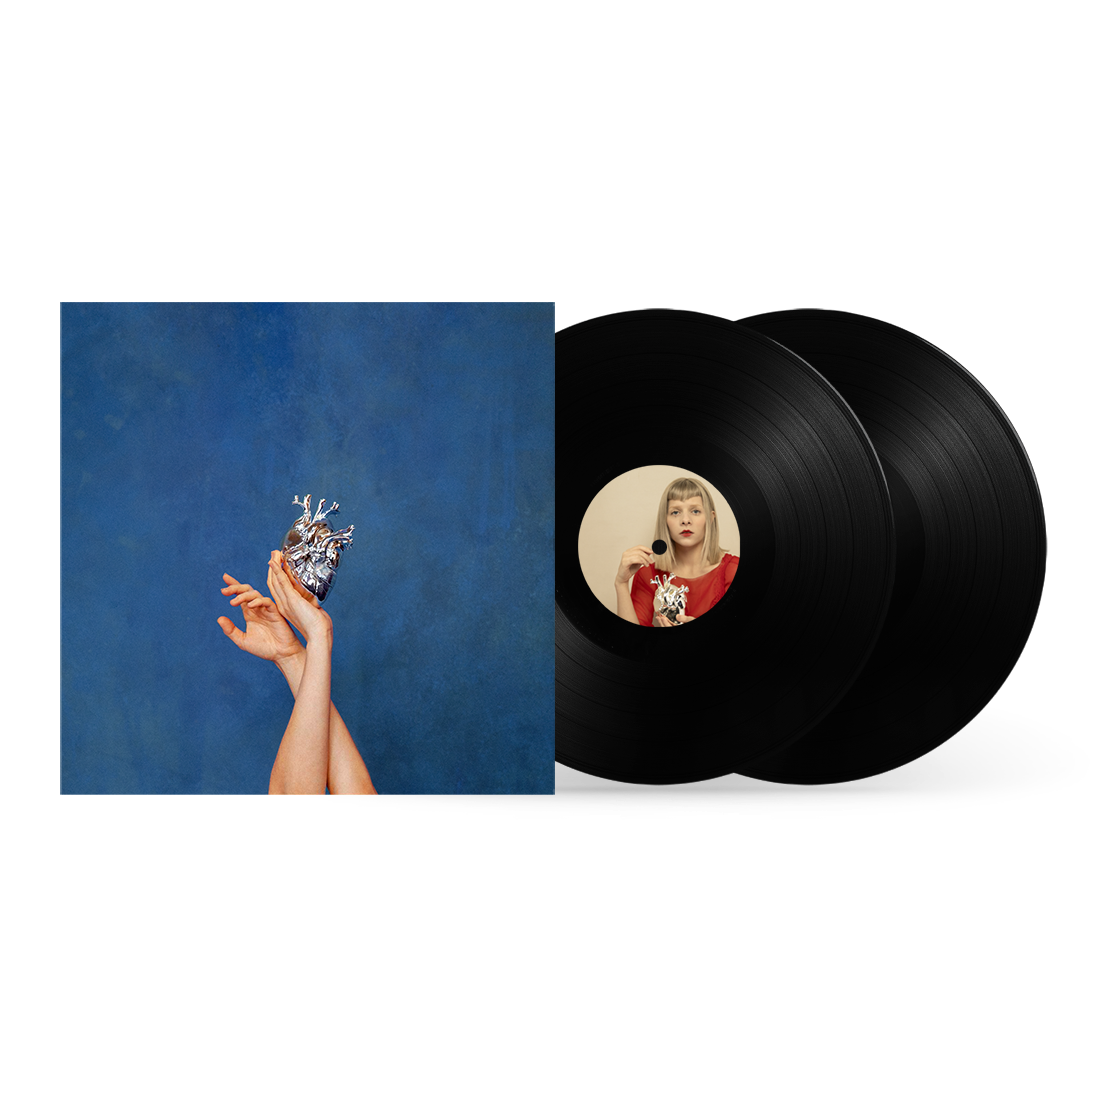 What Happened To The Heart? Limited Red/Blue Vinyl 2LP, Black Vinyl 2LP + Signed Art Card